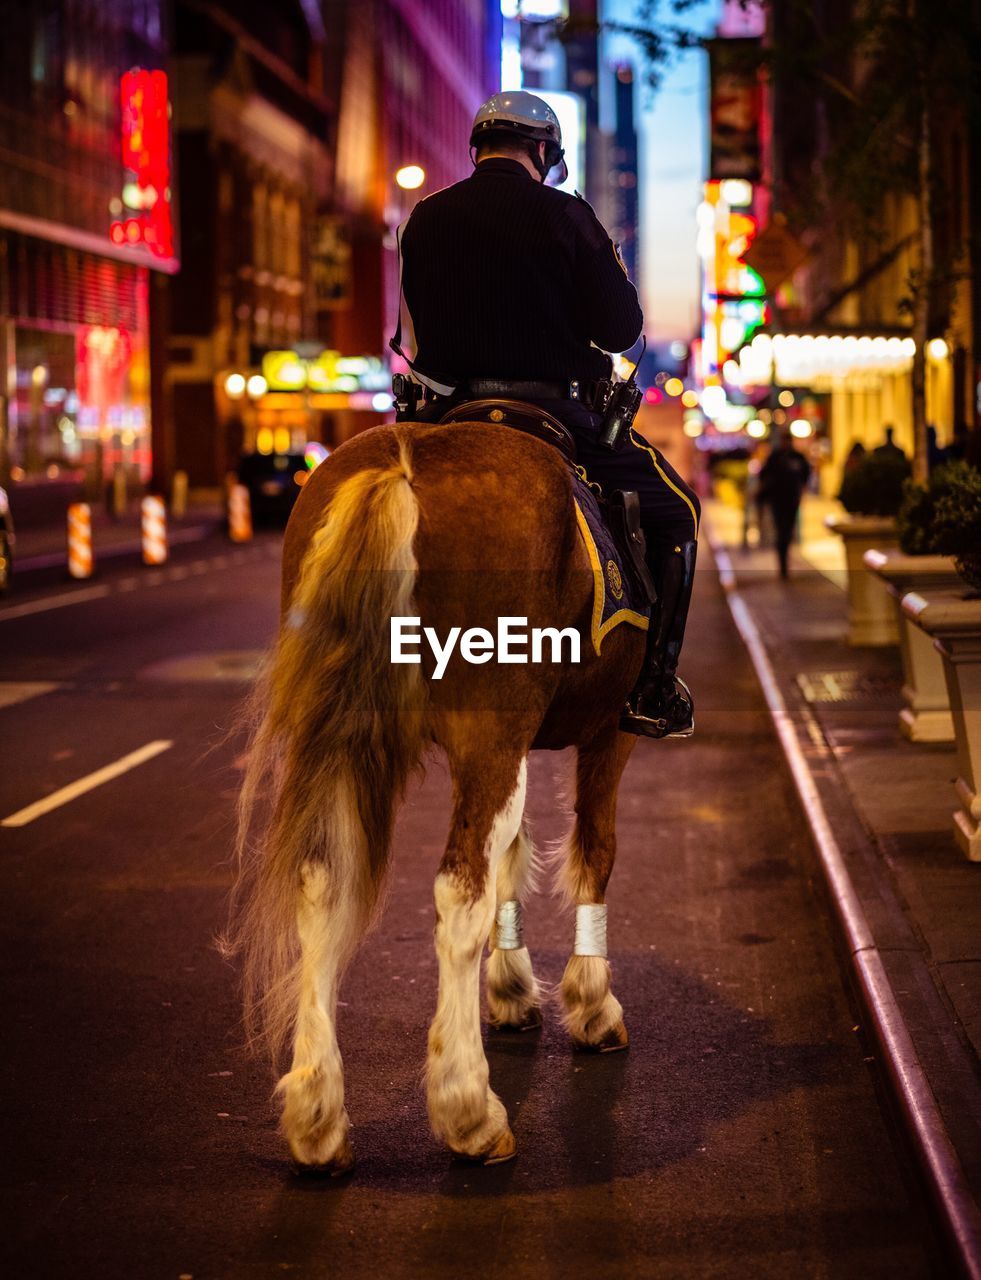 Rear view of policeman riding horse on city street at night